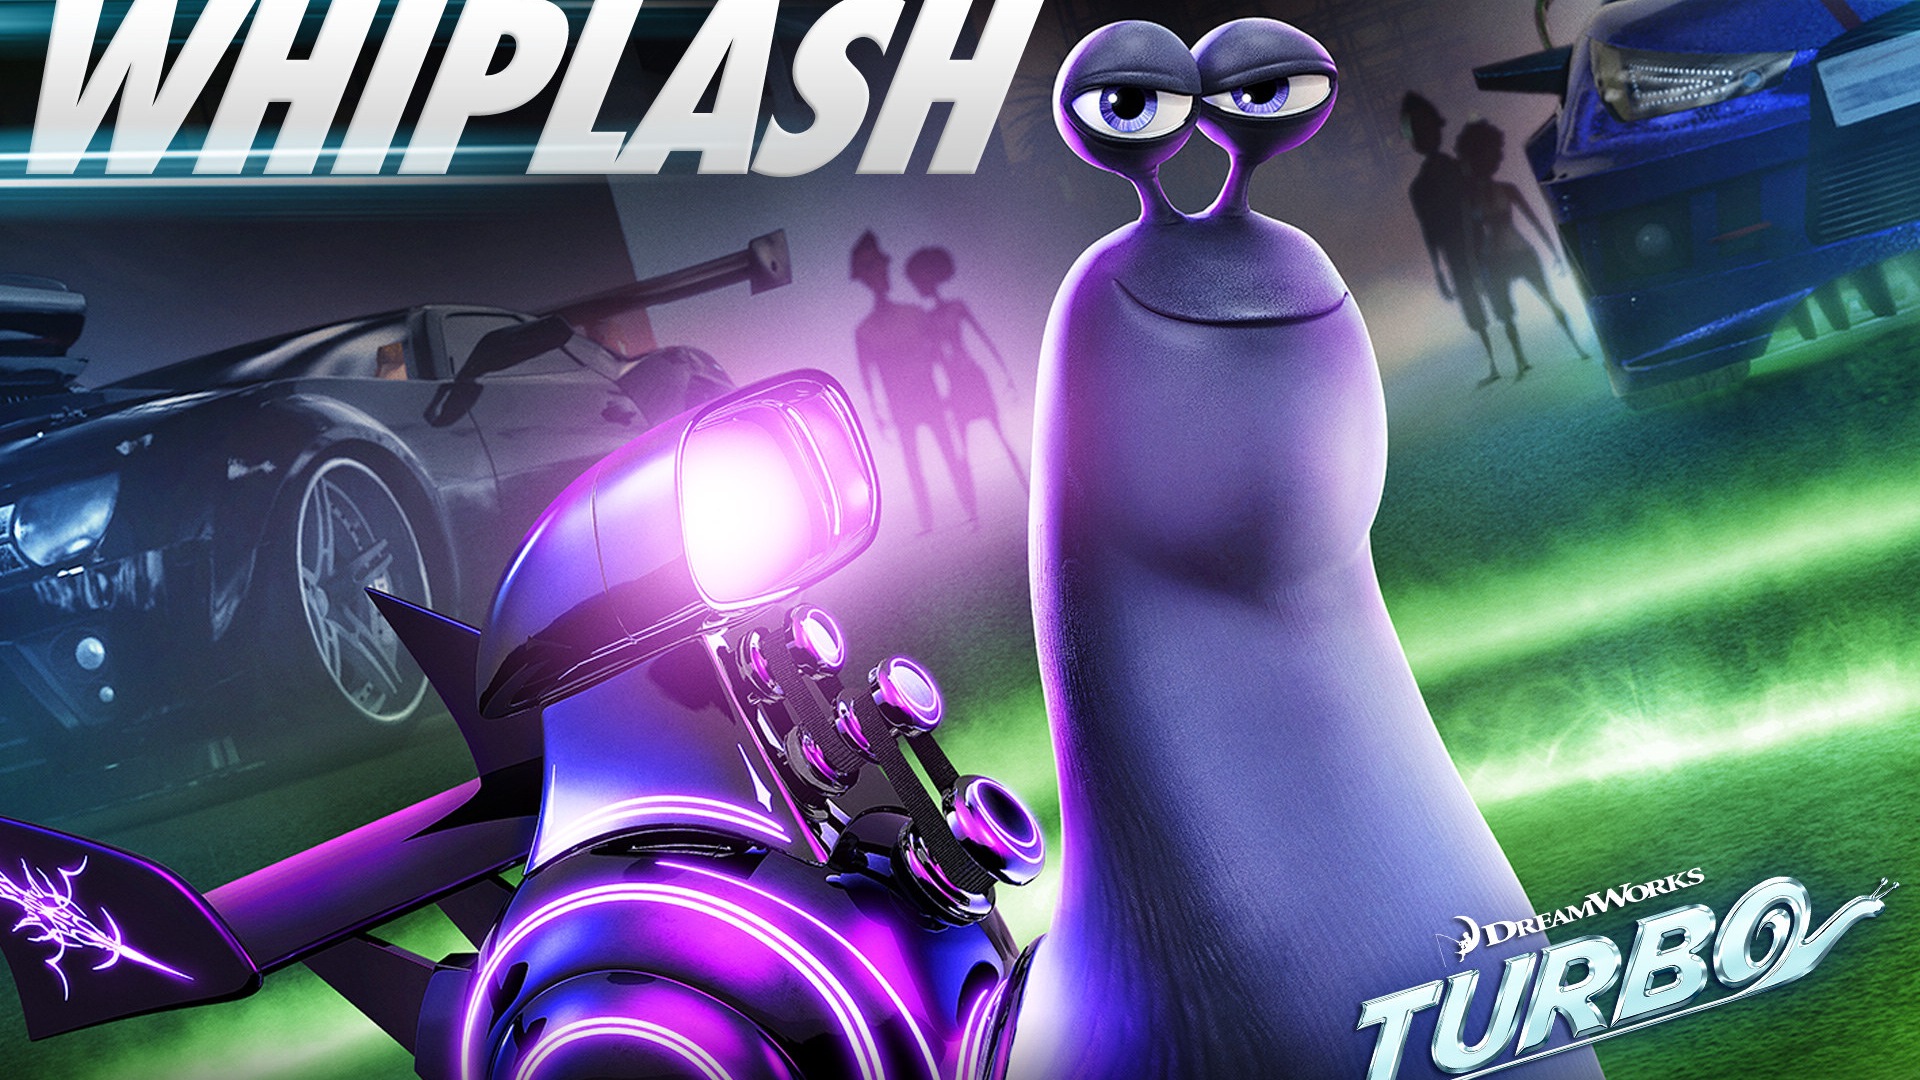 Turbo 3D movie HD wallpapers #5 - 1920x1080